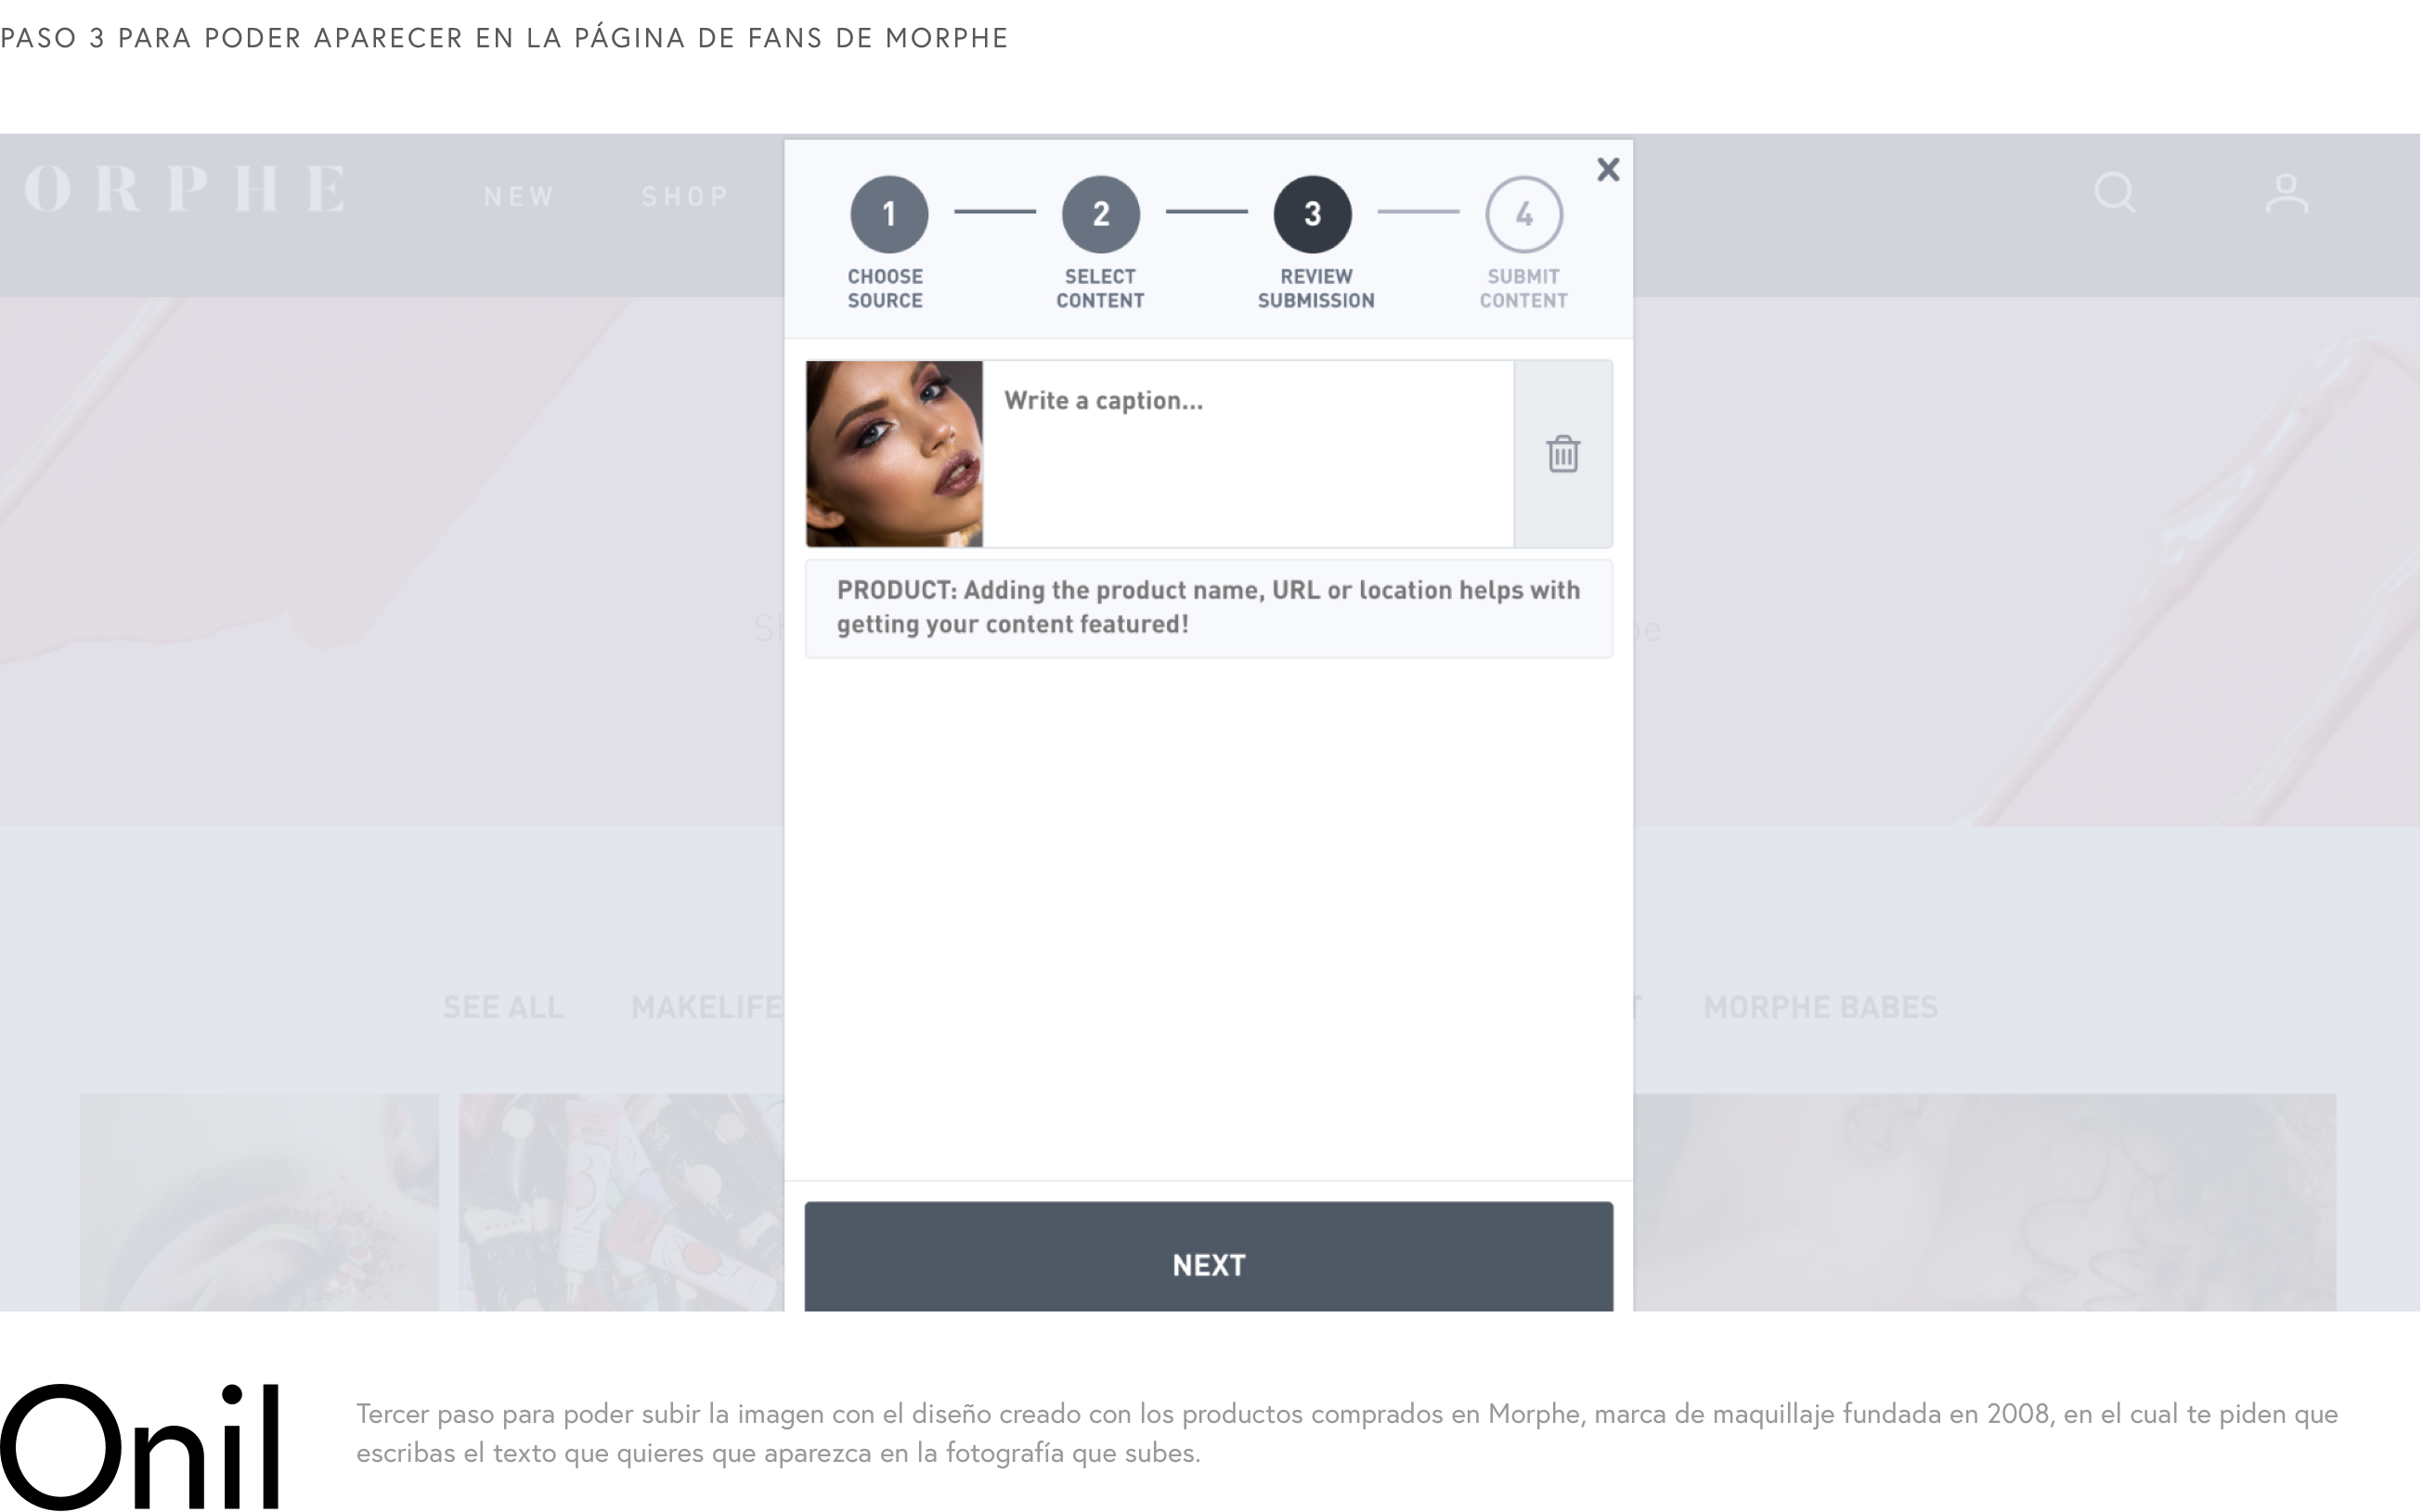 Step 3 to be able to appear on the Morphe fan page - Third step to be able to upload the image with the design created with the products purchased in Morphe, in which they ask you to write the text that you want to appear in the photograph that you upload.